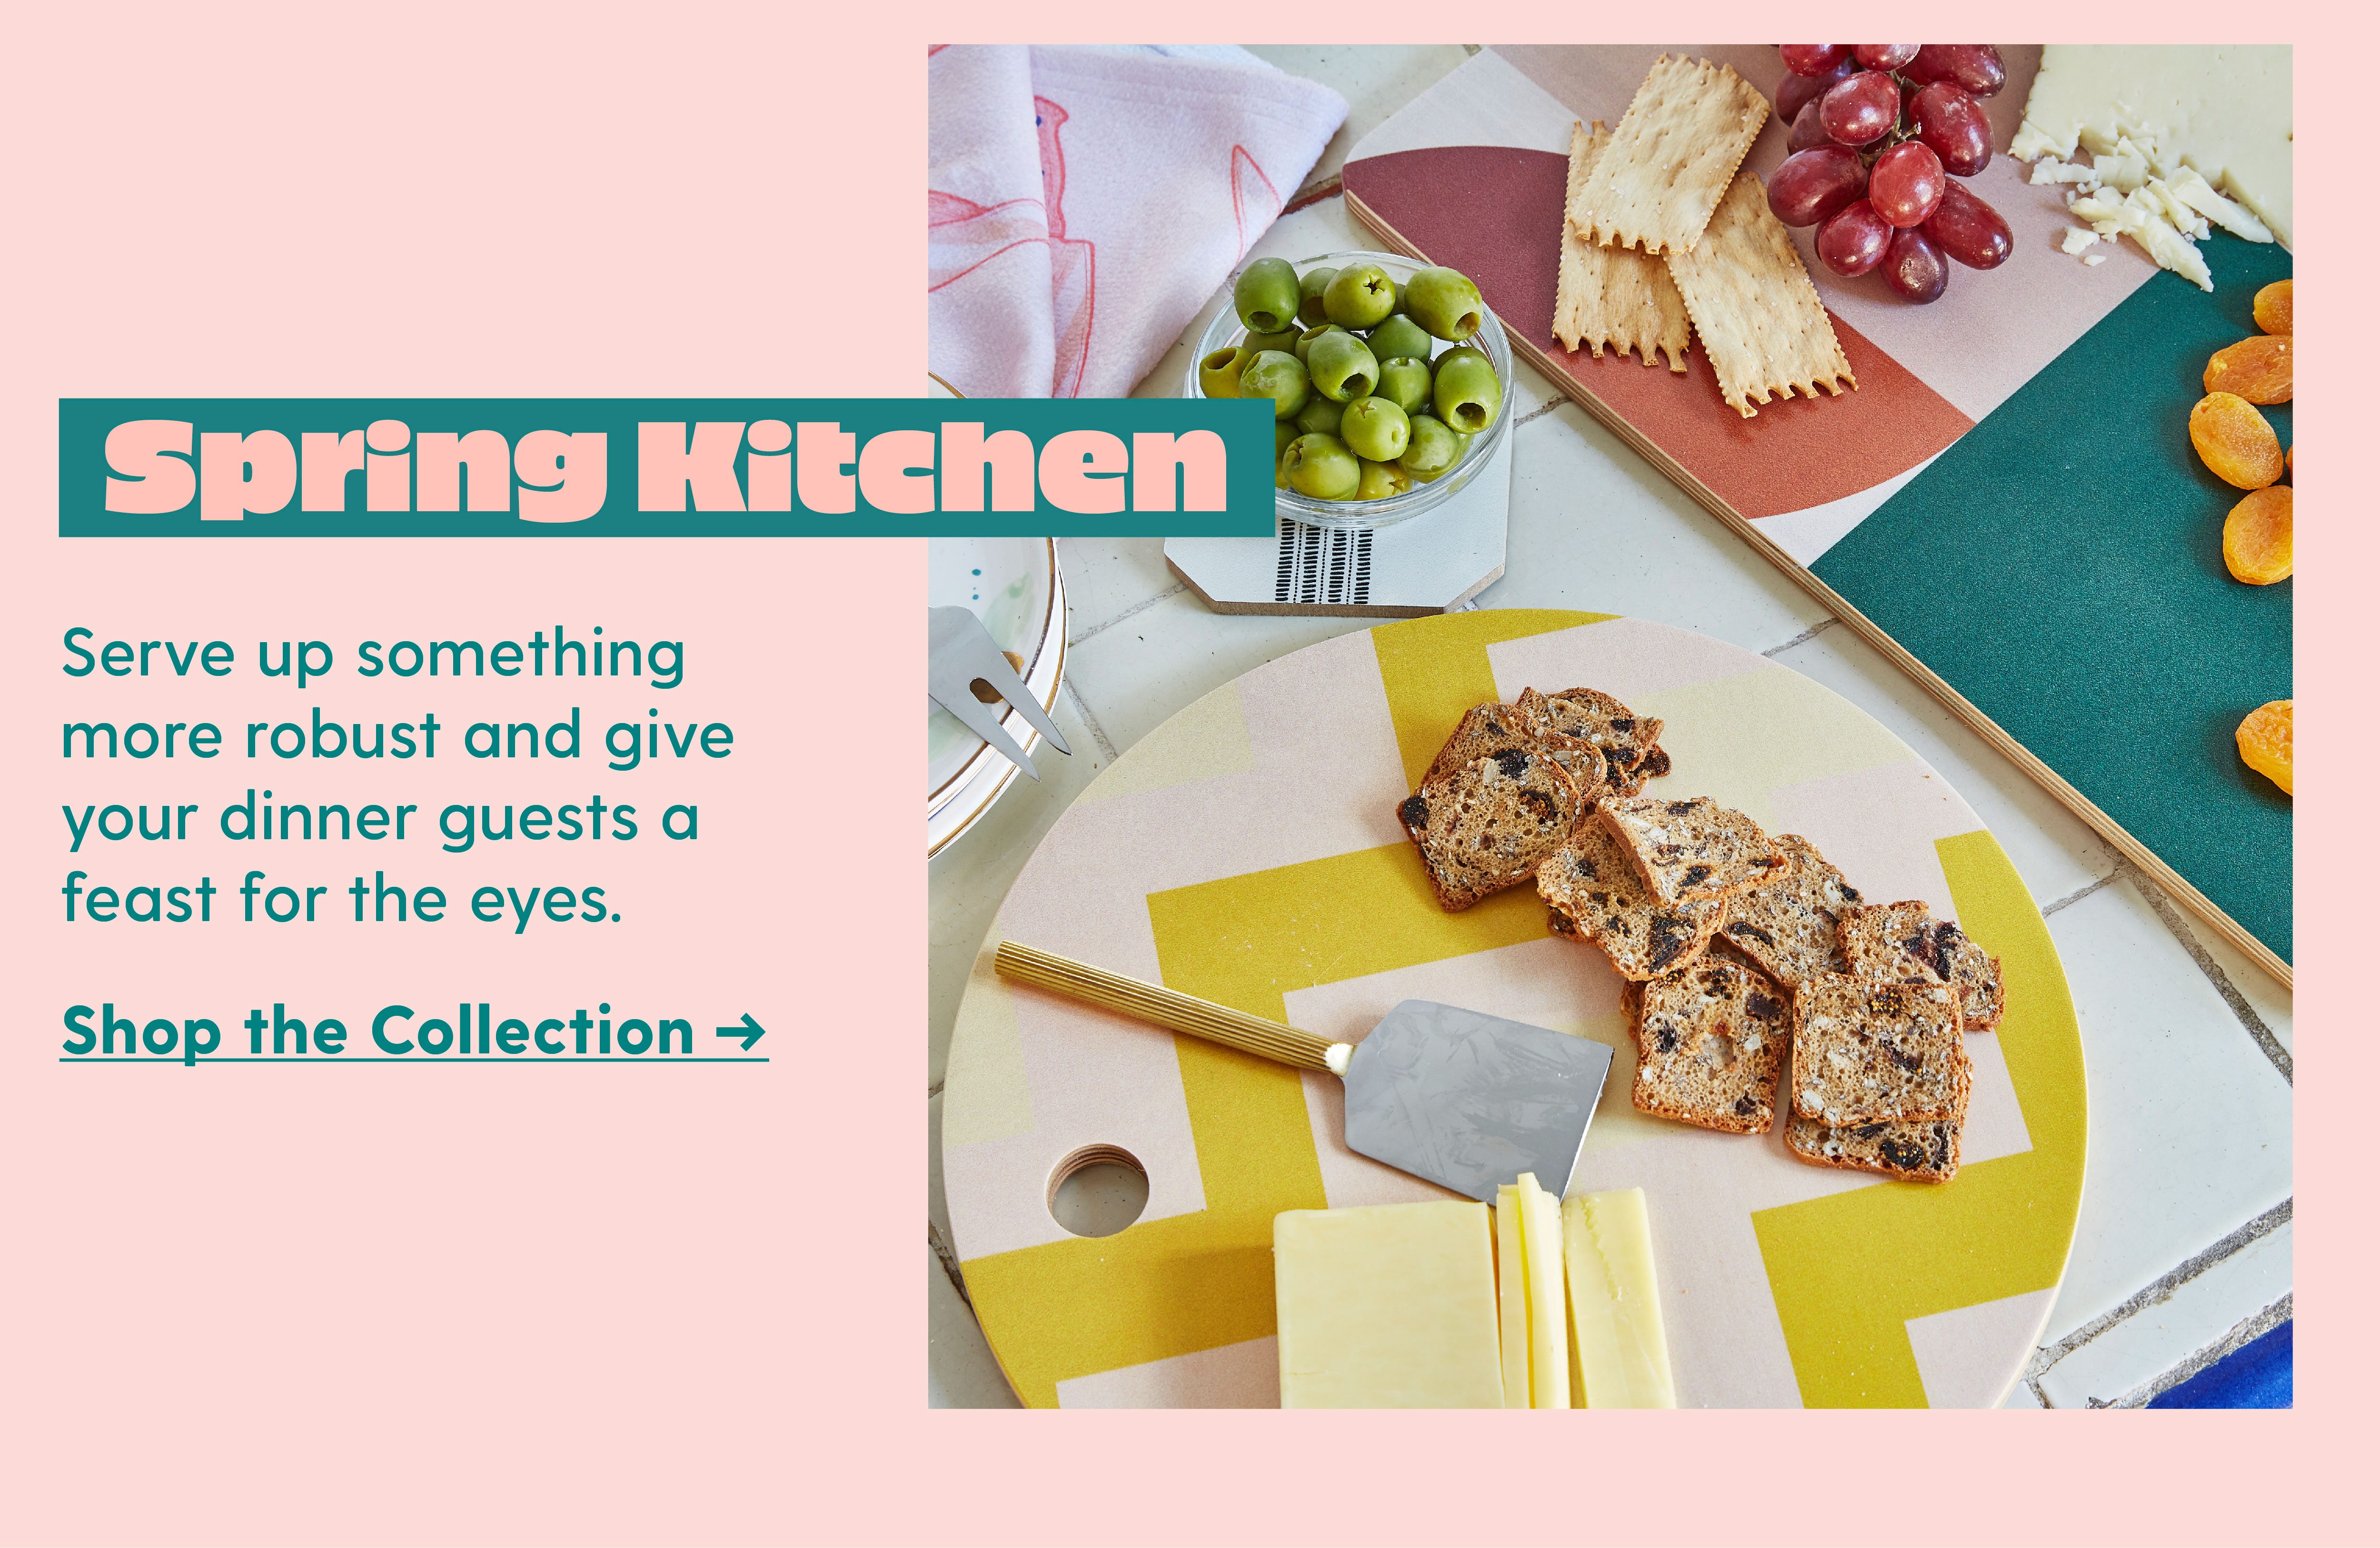 Spring Kitchen Serve up something more robust and give your dinner guests a feat for the eyes. Shop the Collection